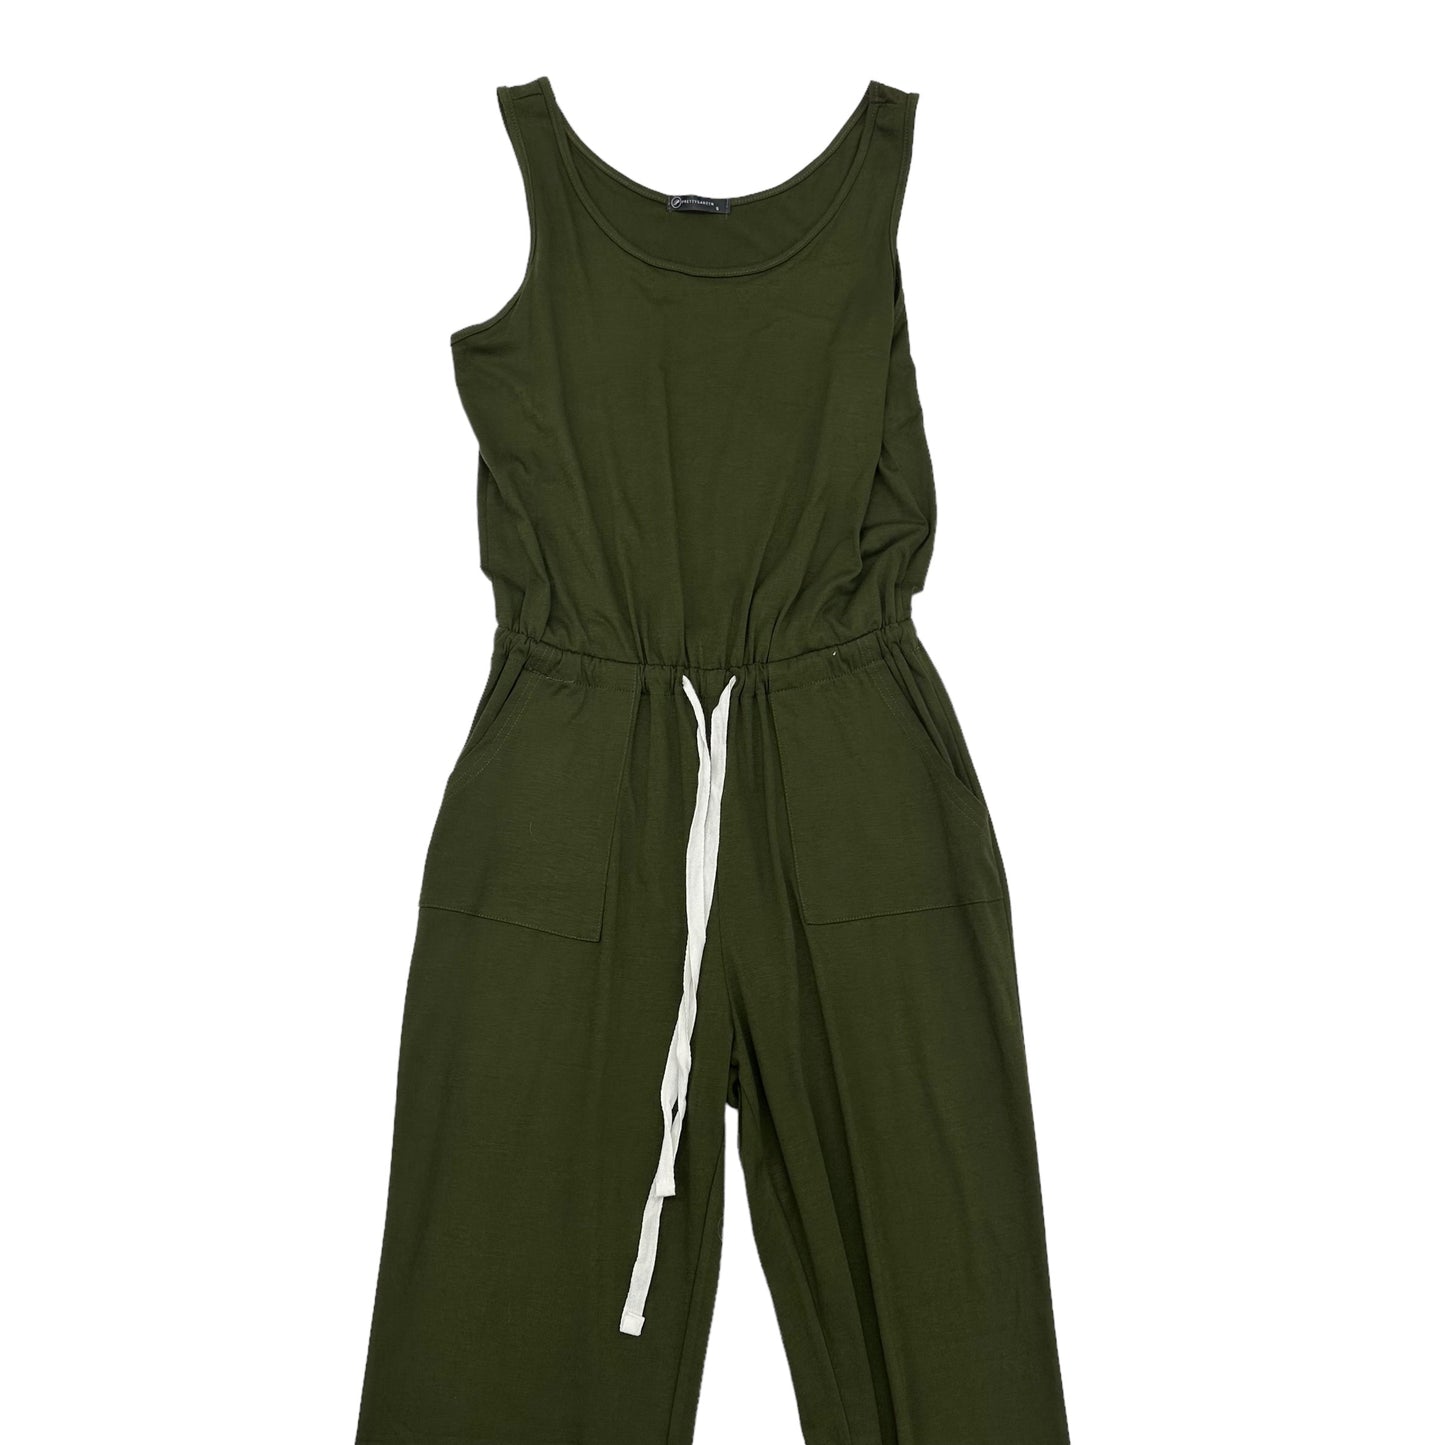 Green Jumpsuit Clothes Mentor, Size S